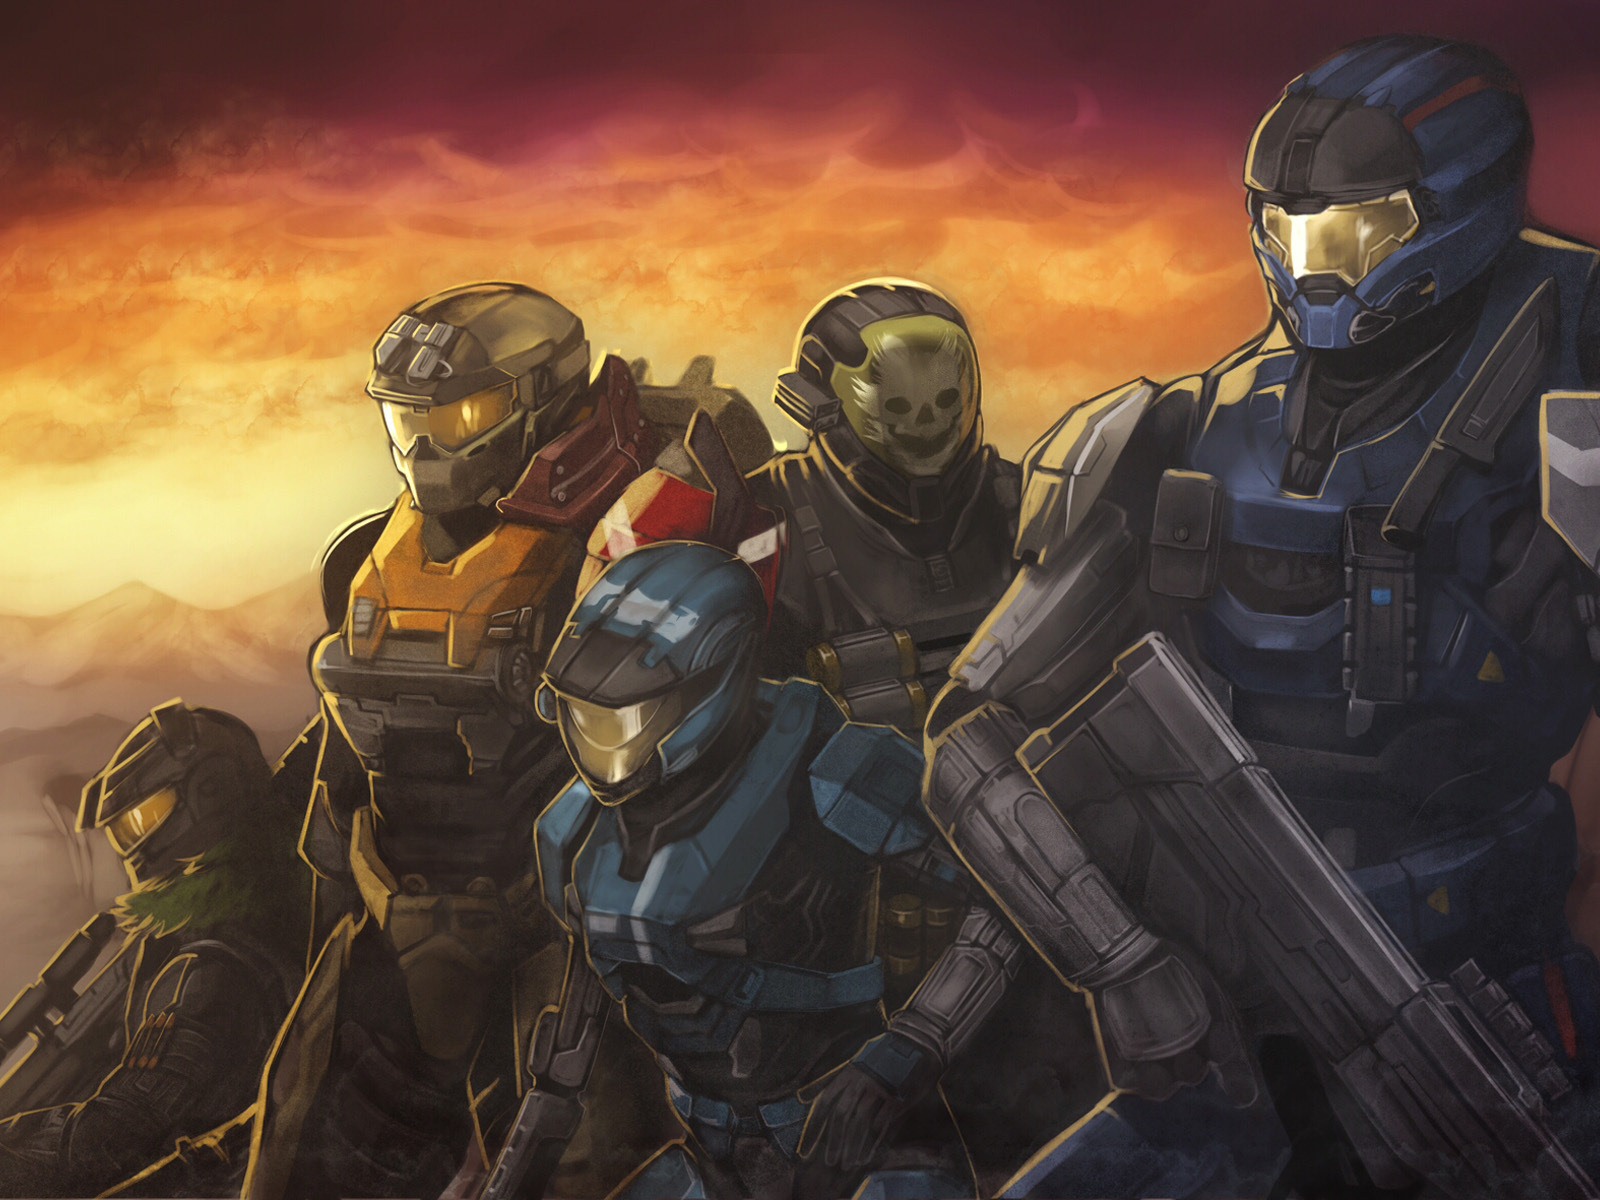 Halo game HD wallpapers #20 - 1600x1200